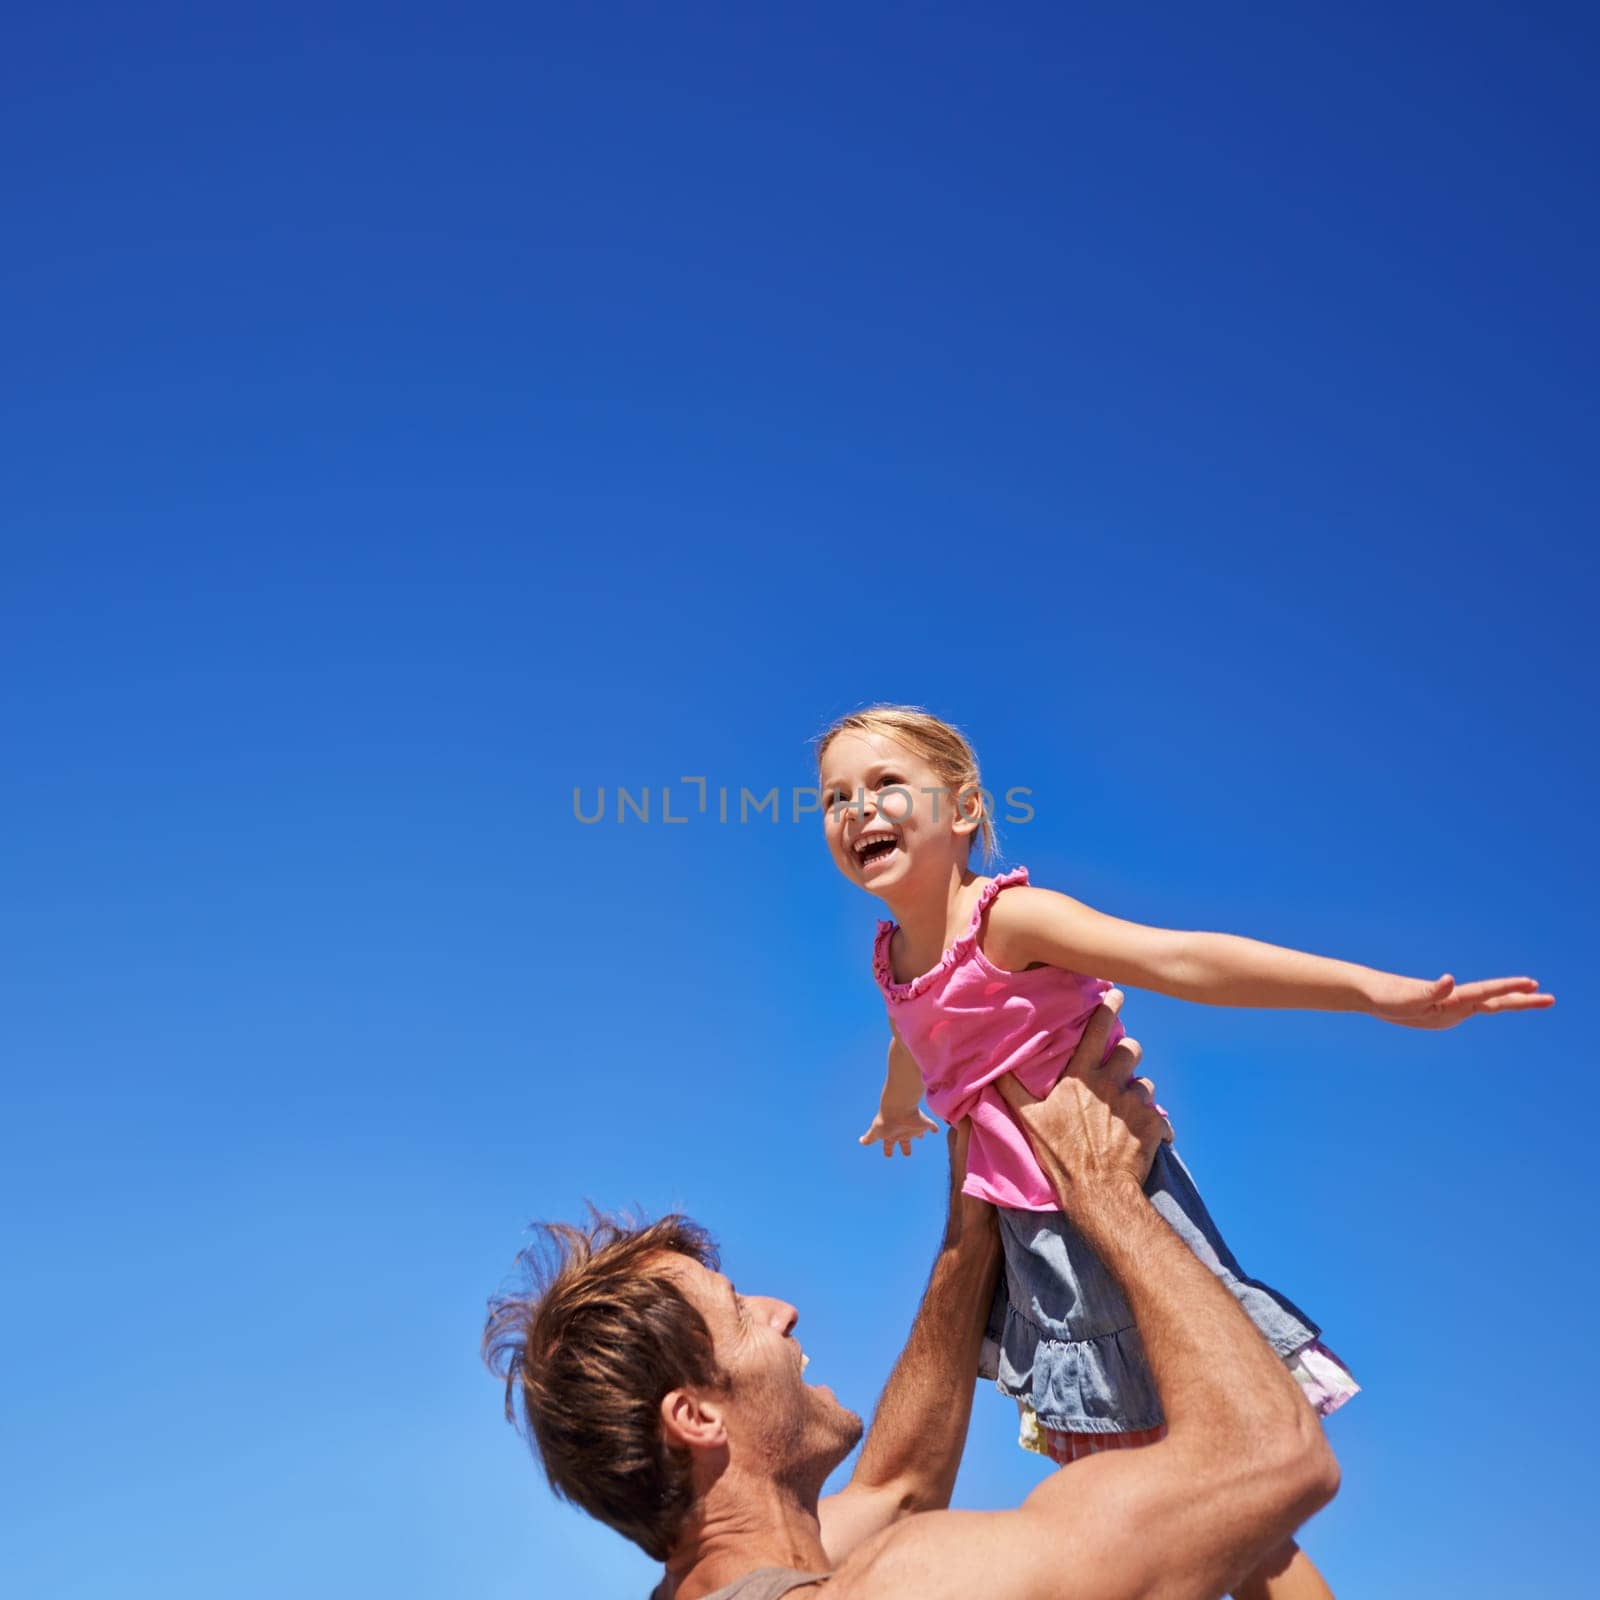 Fly, father and girl with fun, playing and happiness with family, sky background and smile. Outdoor, nature and dad carrying daughter with wellness and weekend break with summer, freedom and energy by YuriArcurs